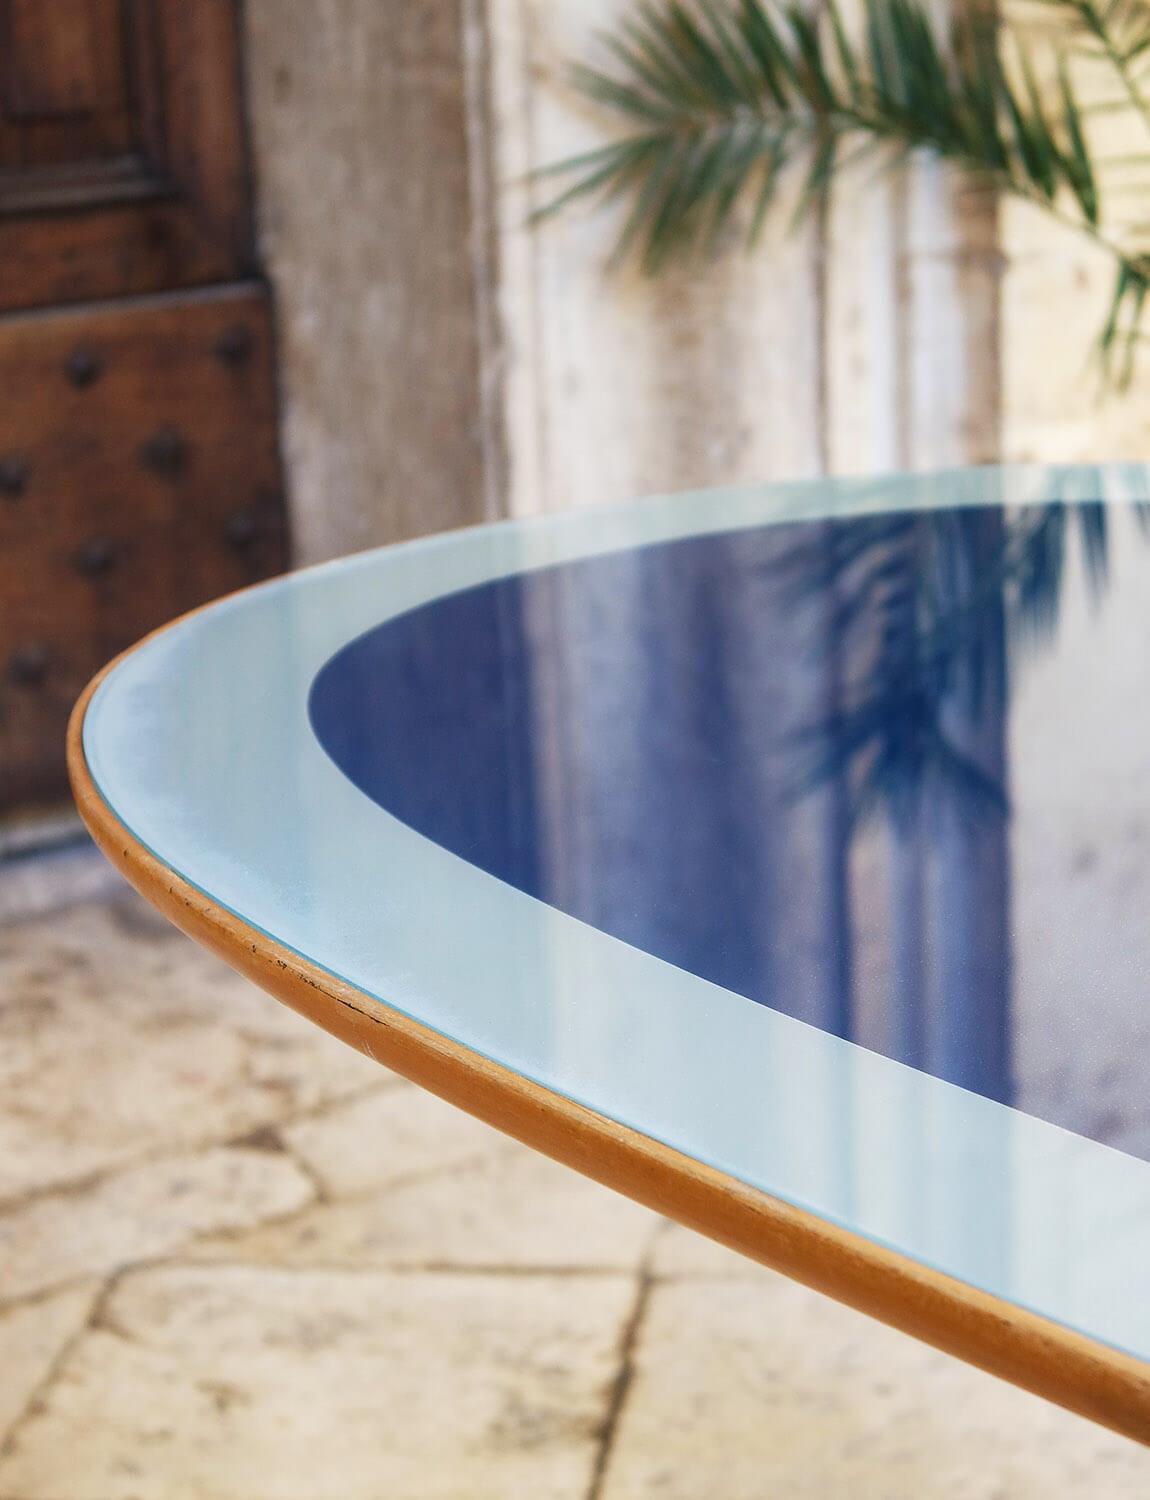 Mid-Century Modern Mid-century Italian Blue Glass Dining Table by Ico Parisi made in 1953